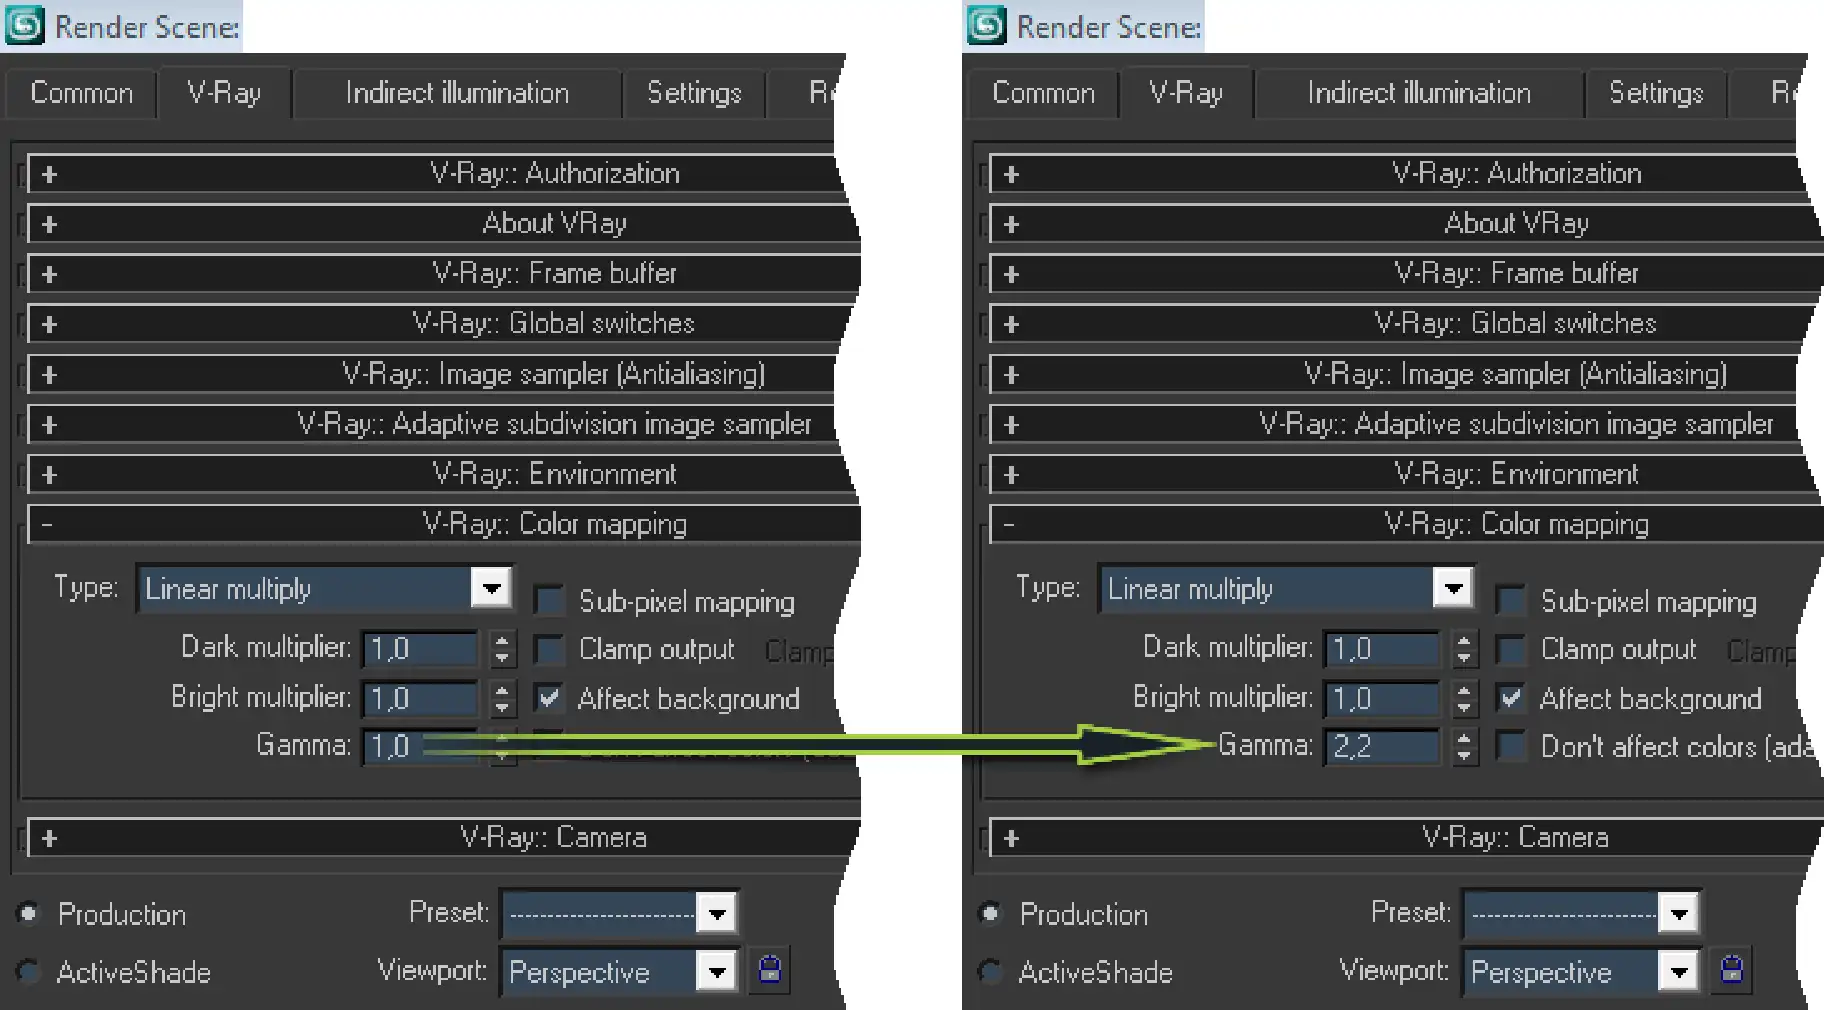 Instruction of how to set gamma 2.2 V-Ray color mapping in render scene dialog of 3ds Max. V-Ray Color Mapping Gamma Value